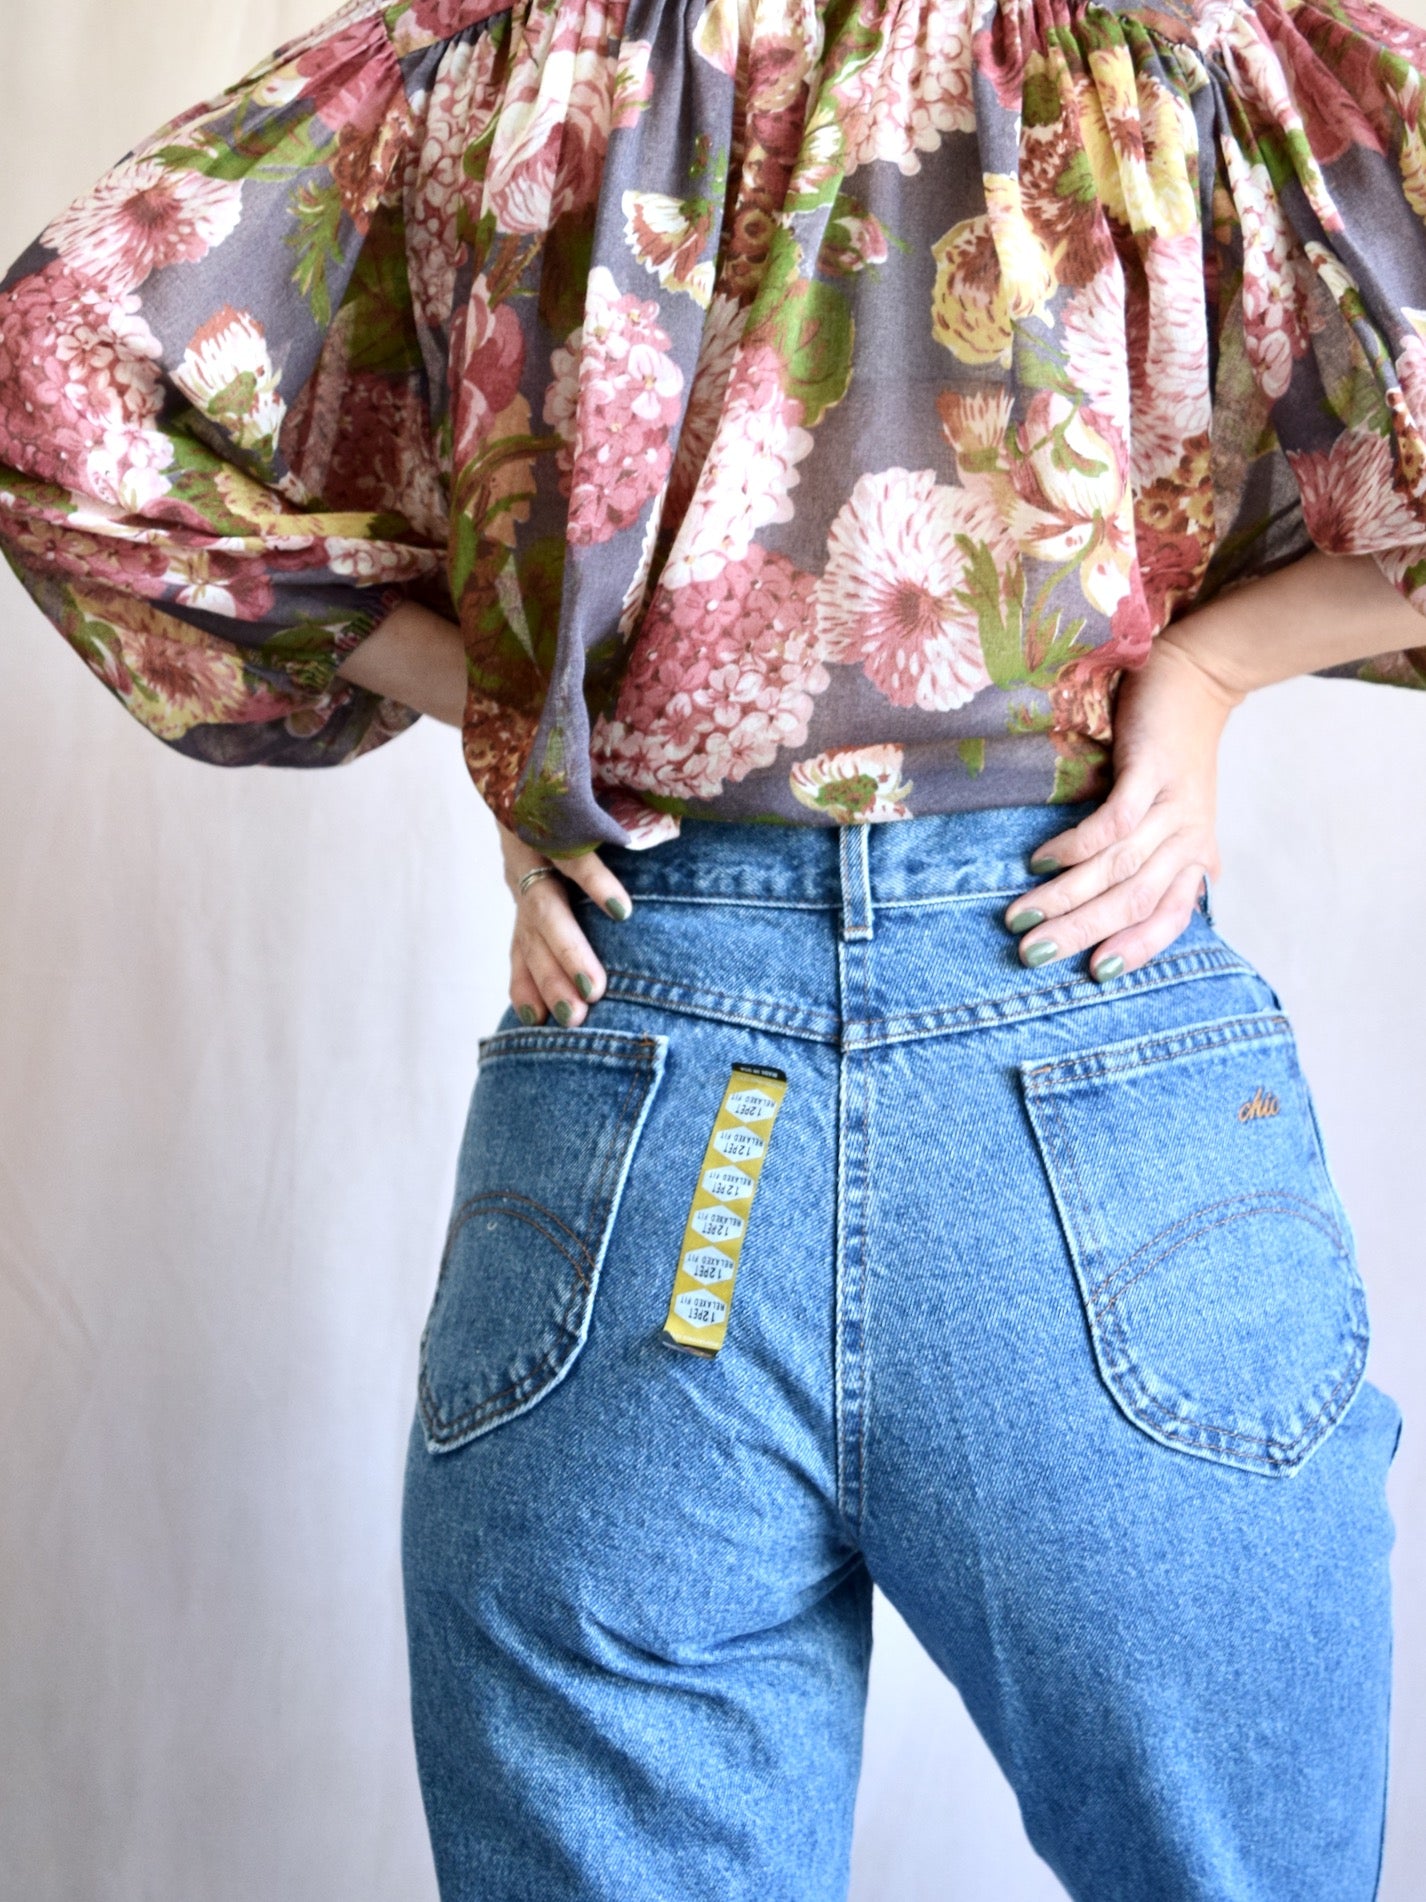 28 x 27 vintage 1990s high-waisted denim by Chic jeans in light blue wash, new old stock